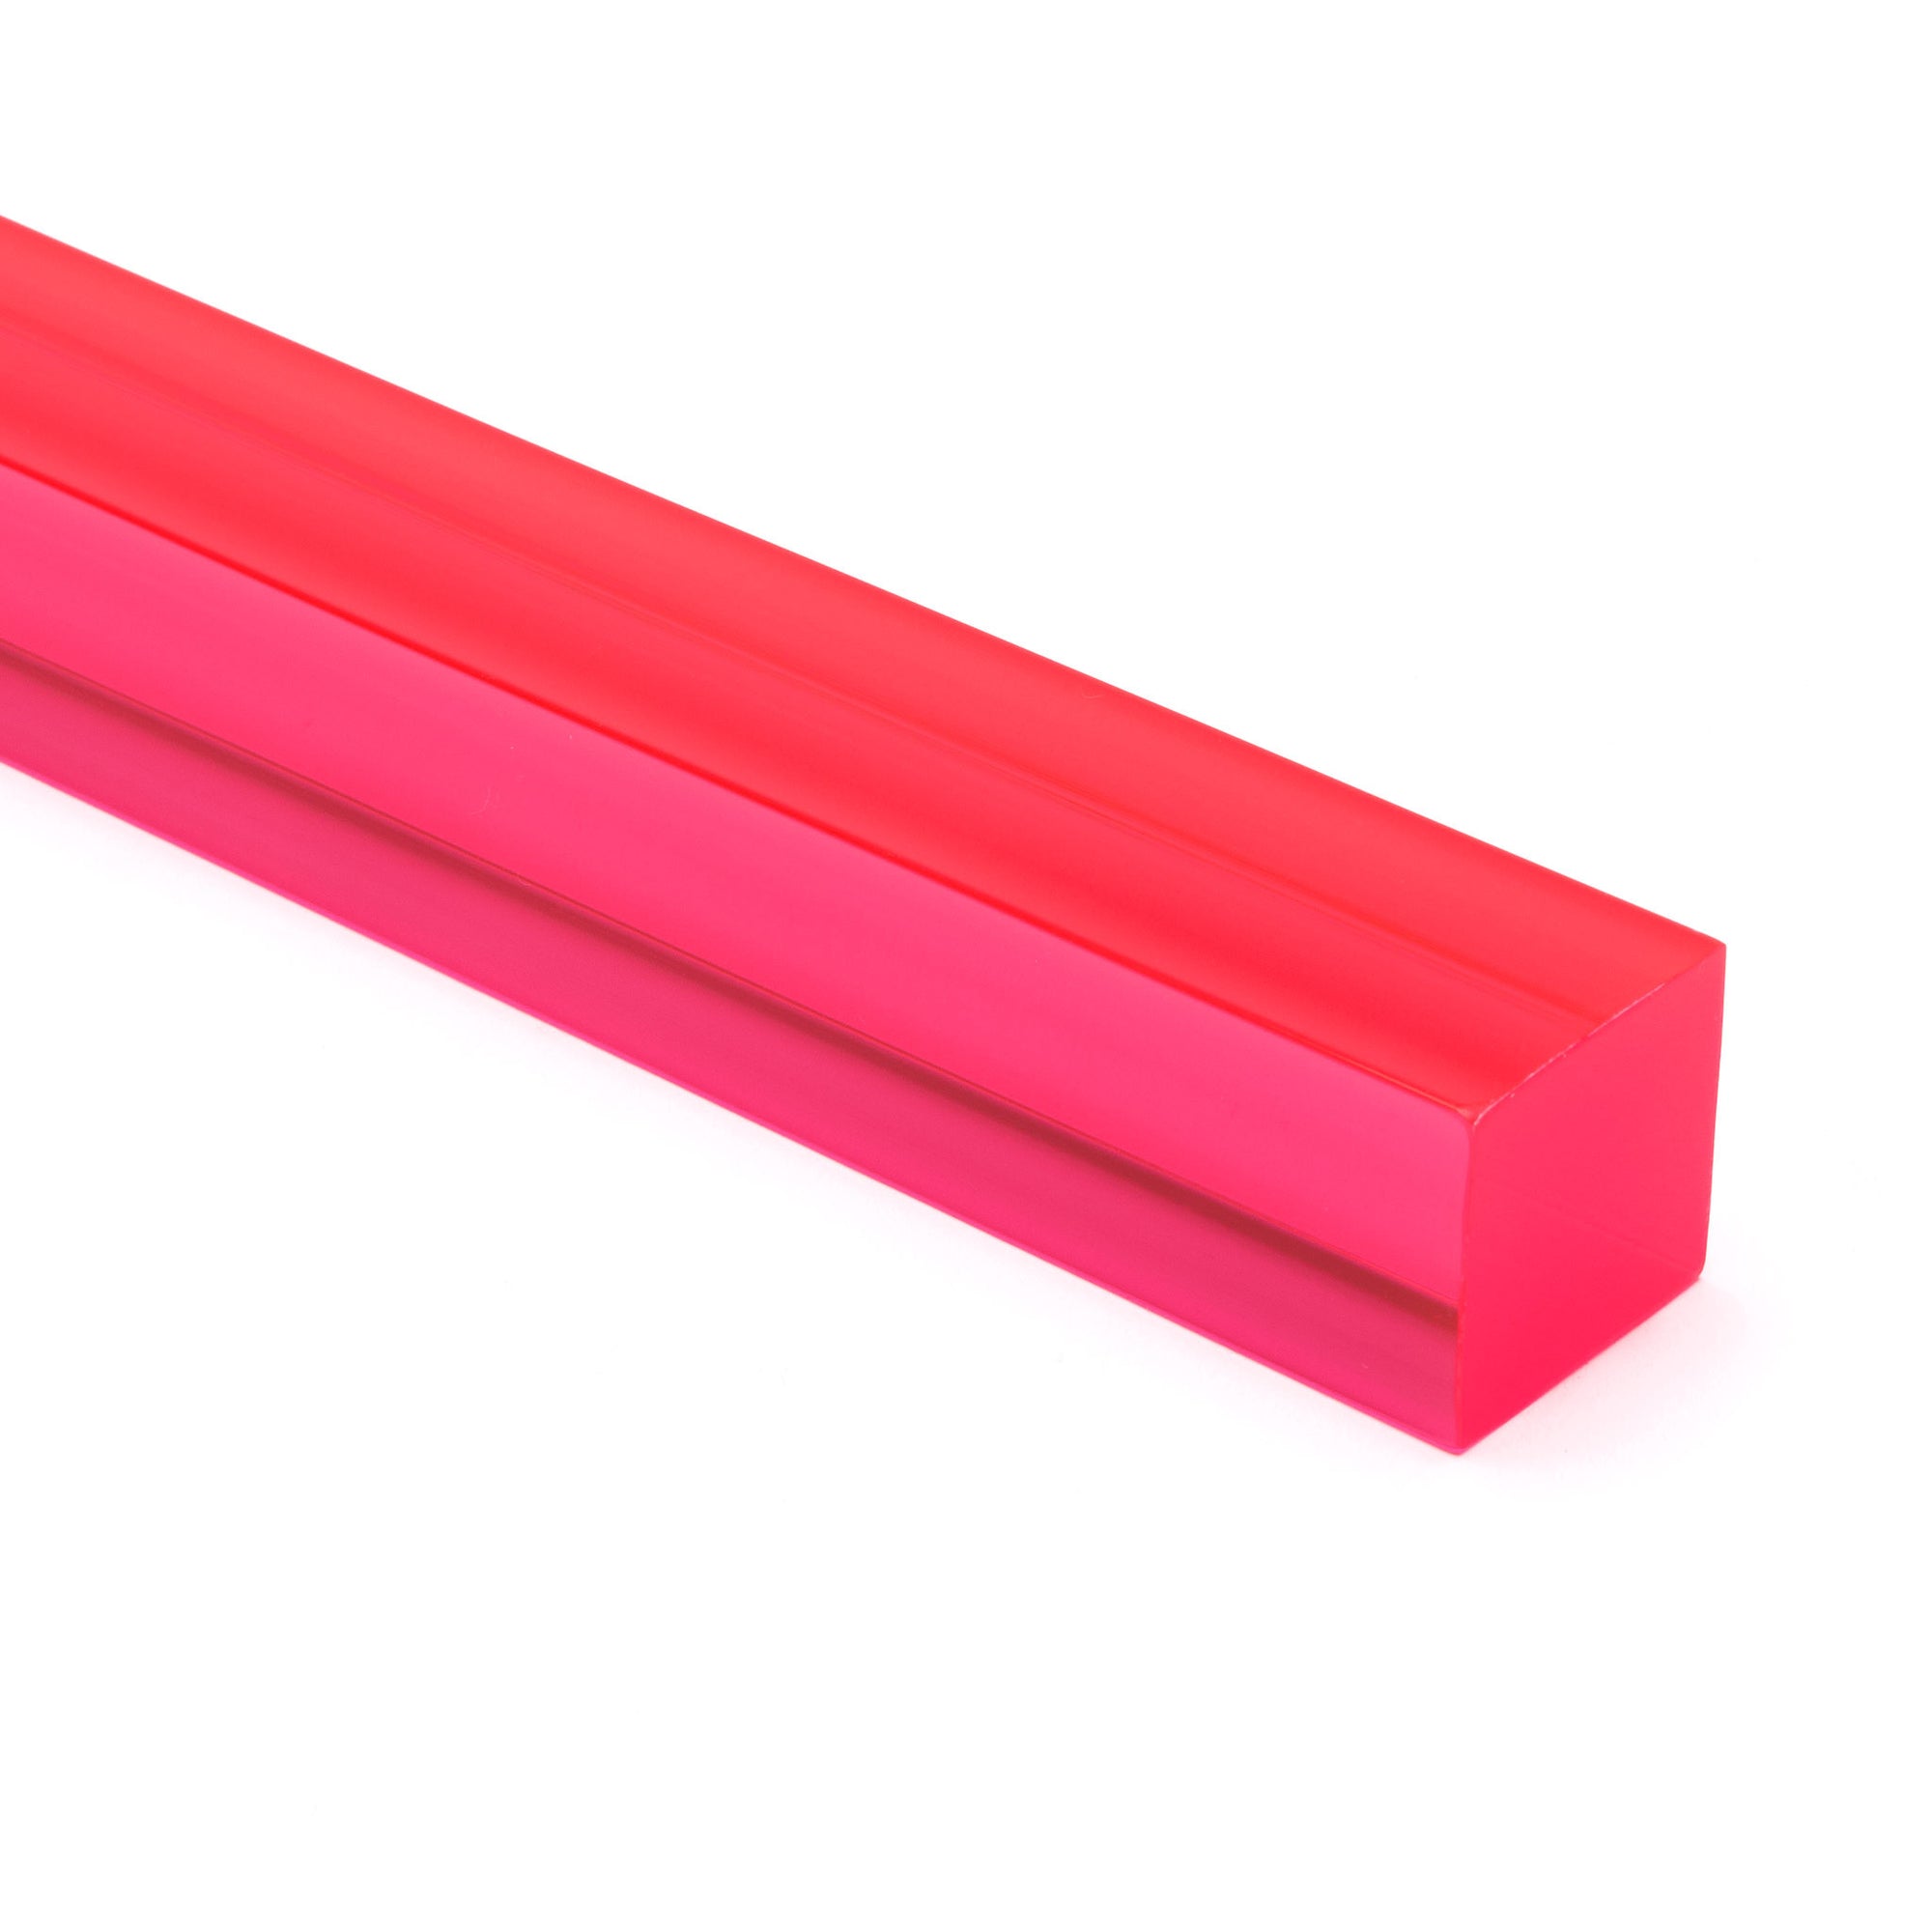 Pink-Red Fluorescent Acrylic Square Rod